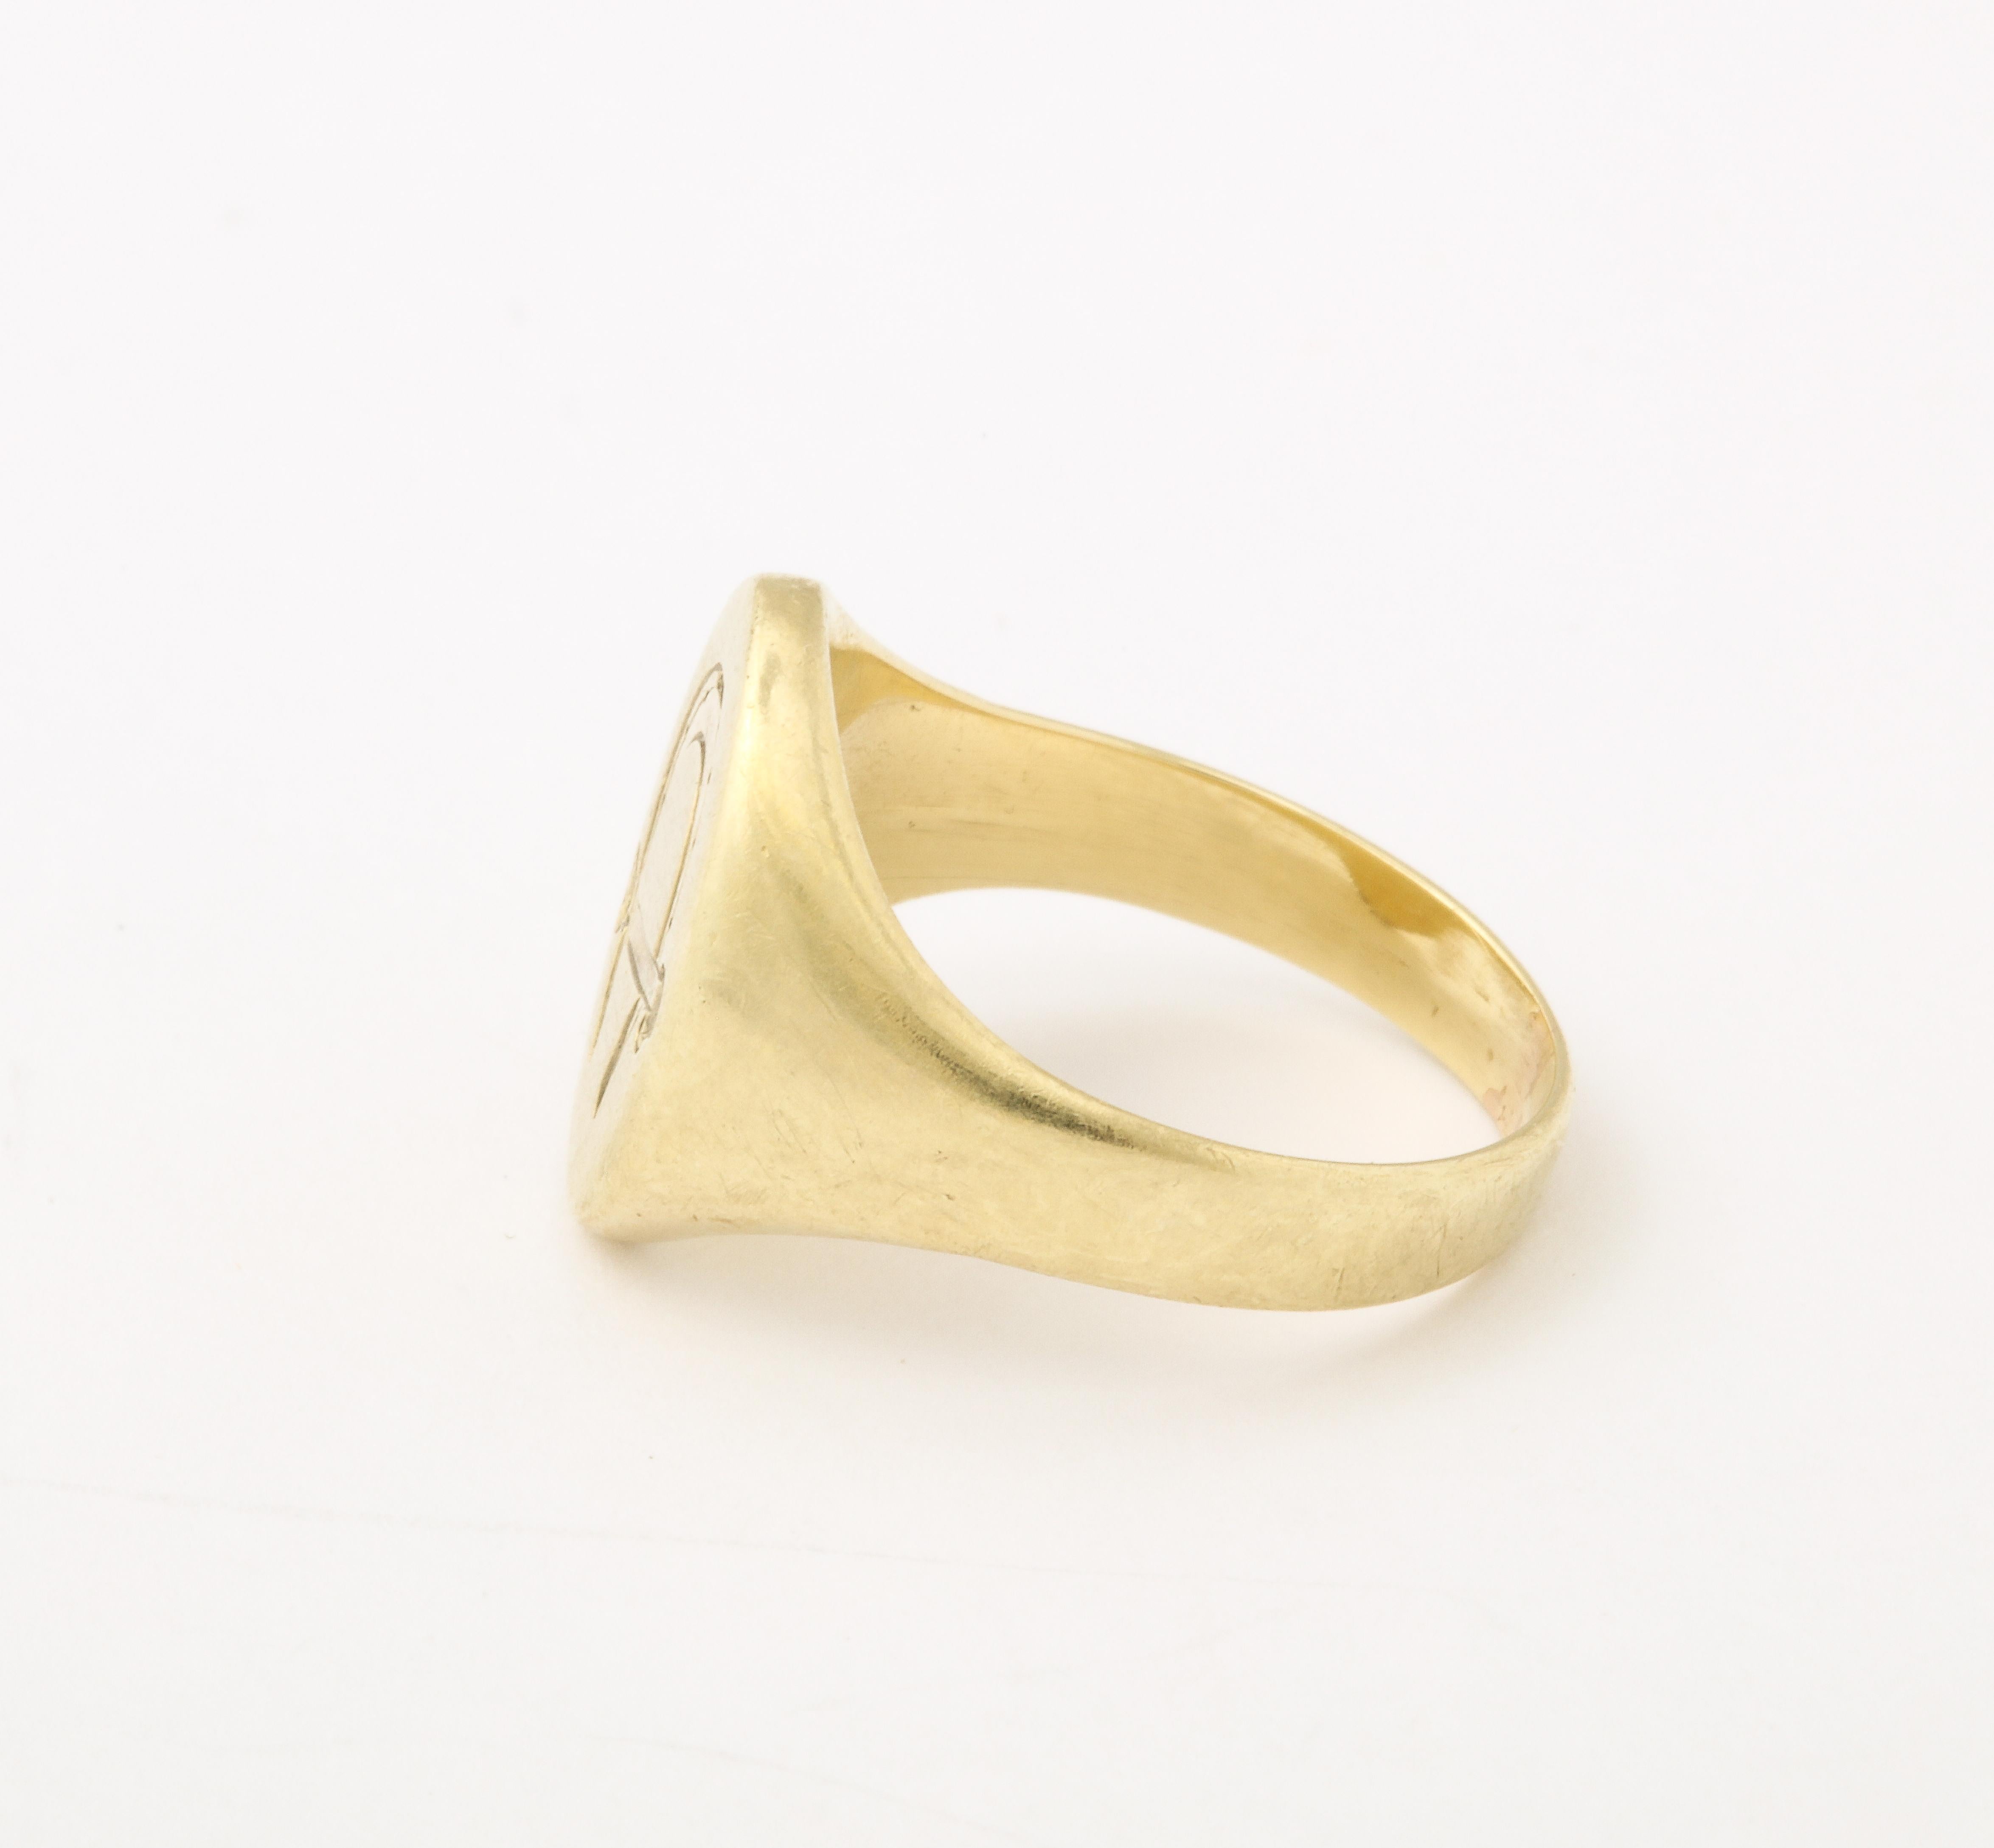 A Retro Equestrian or Lucky Signet Ring with Horseshoe and Crop 14 Kt Gold In Excellent Condition For Sale In Stamford, CT